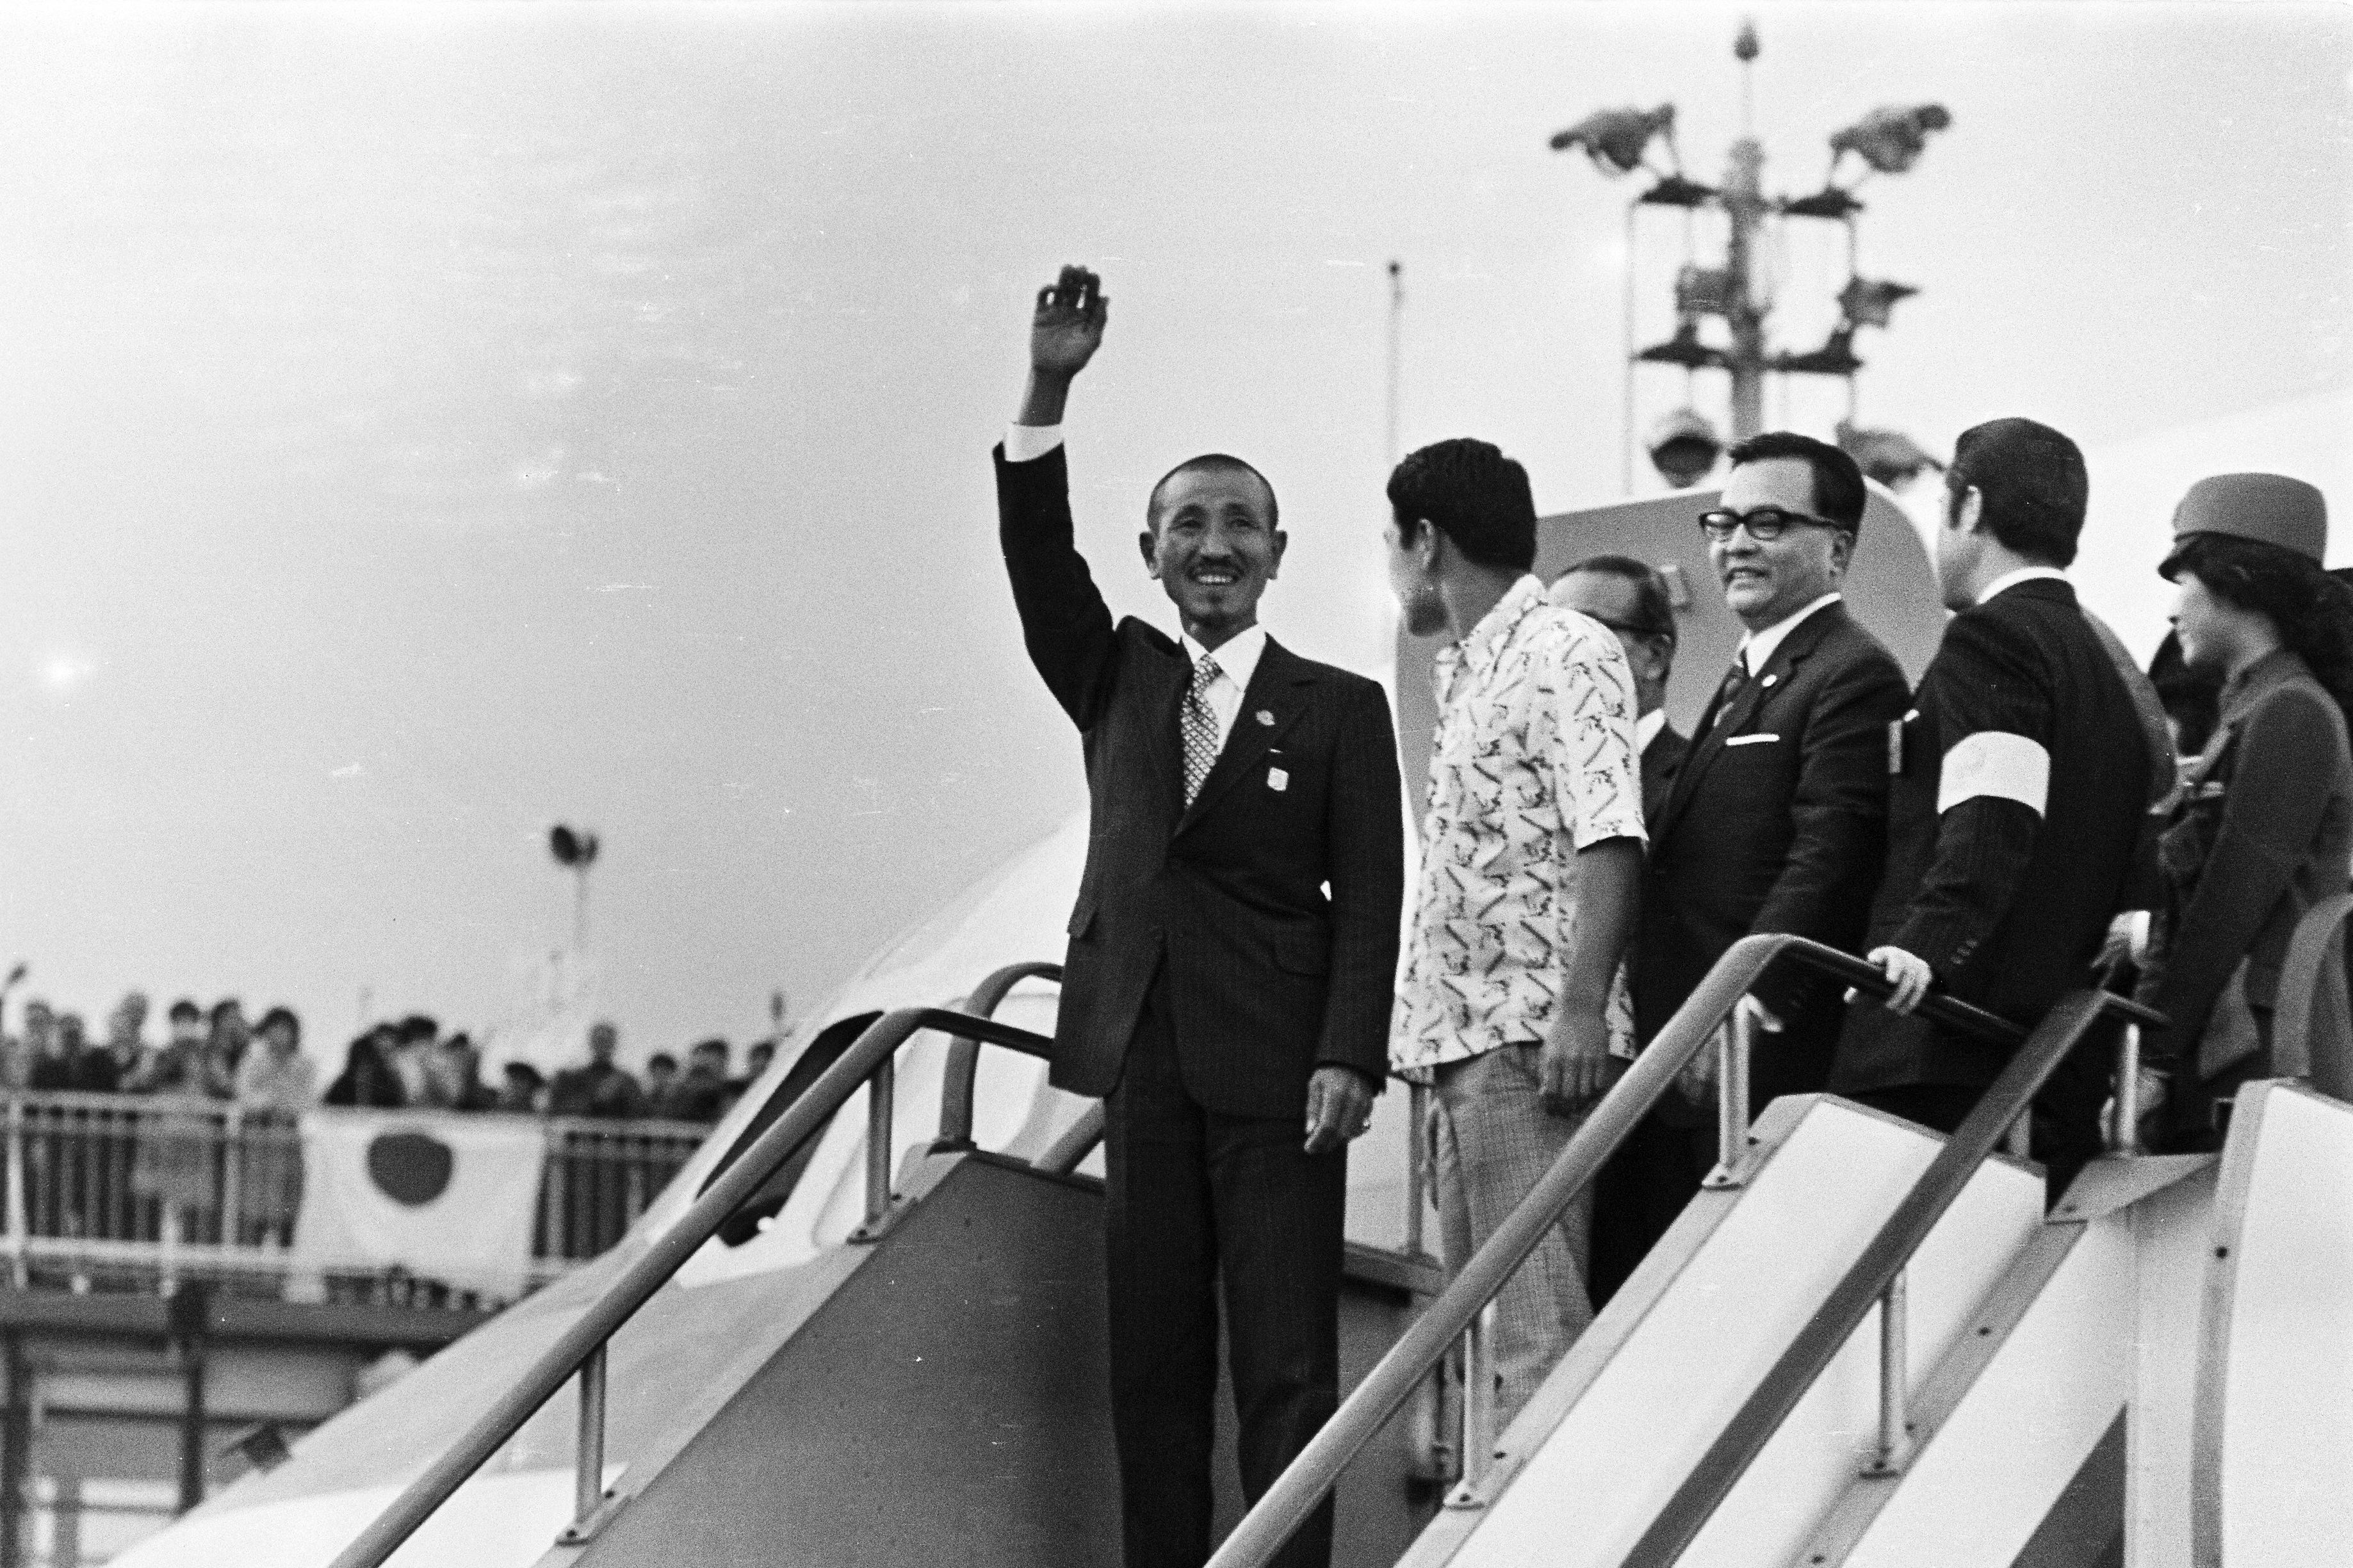 Onoda waves on arrival at Haneda Airport on March 12, 1974 in Tokyo, Japan. (Getty Images)